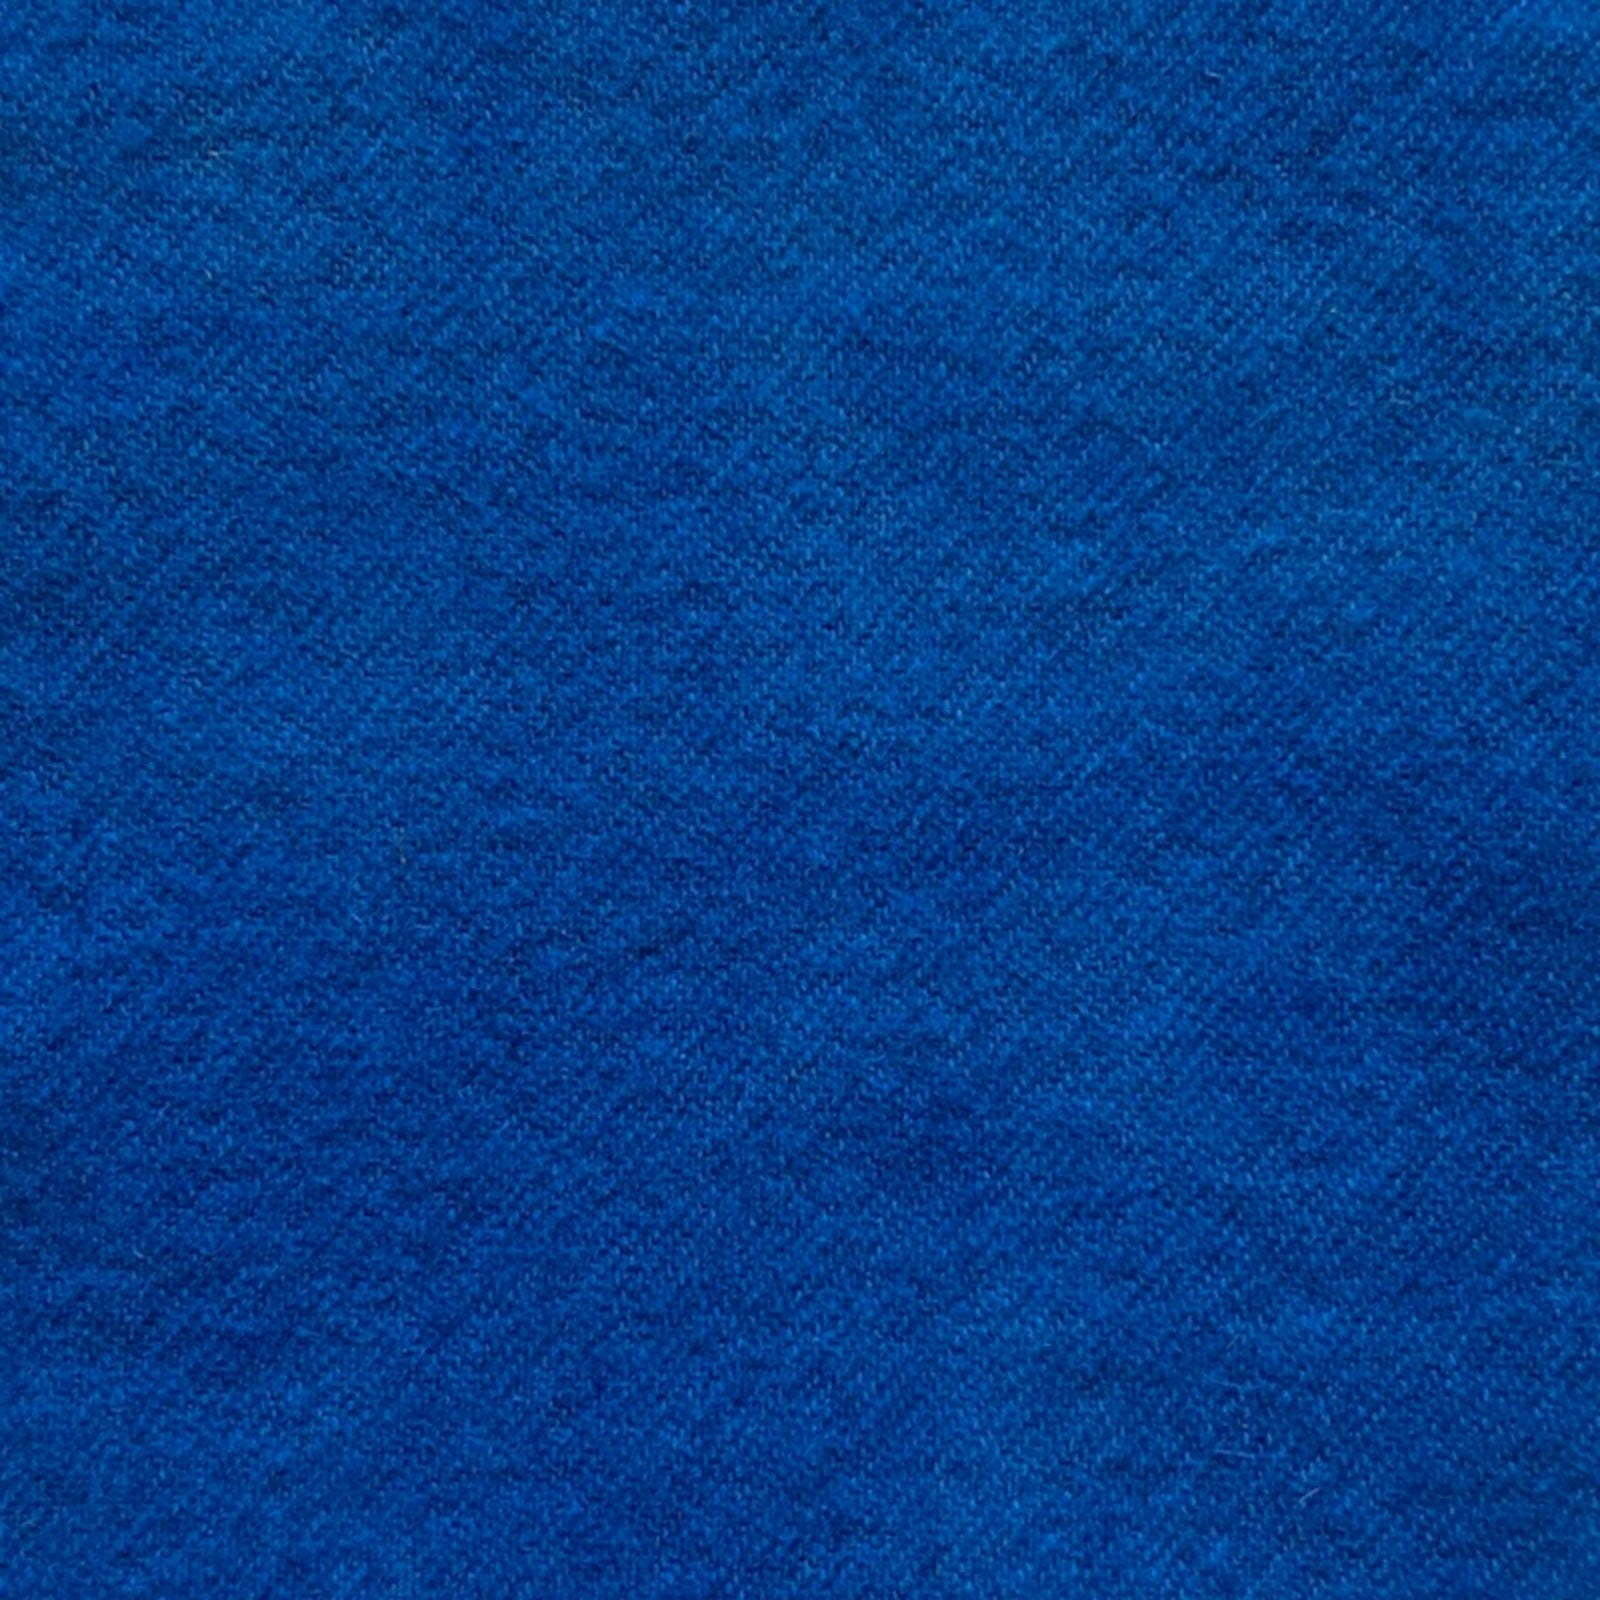 Hyper Blue - Colorama Hand Dyed Wool - Offered by HoneyBee Hive Rug Hooking